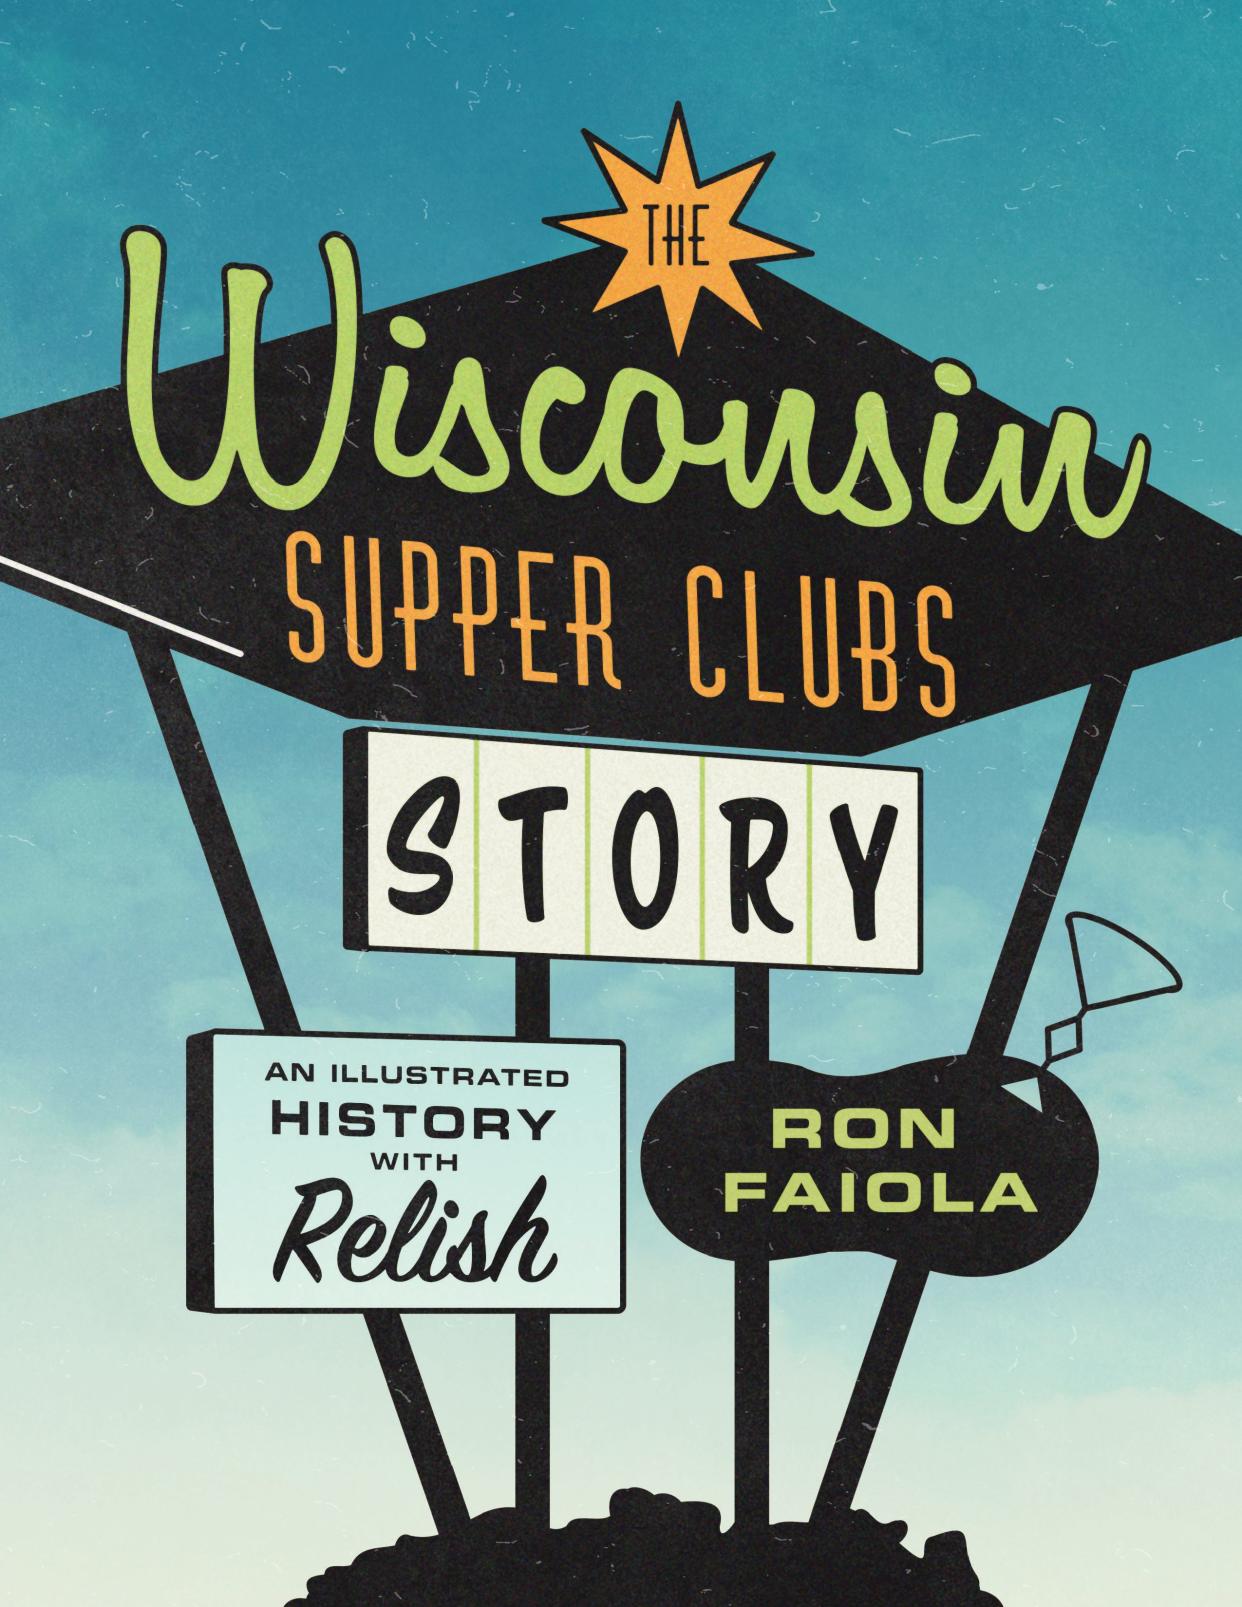 "The Wisconsin Supper Clubs Story: An Illustrated History, With Relish" is the third supper club book by Ron Faiola.